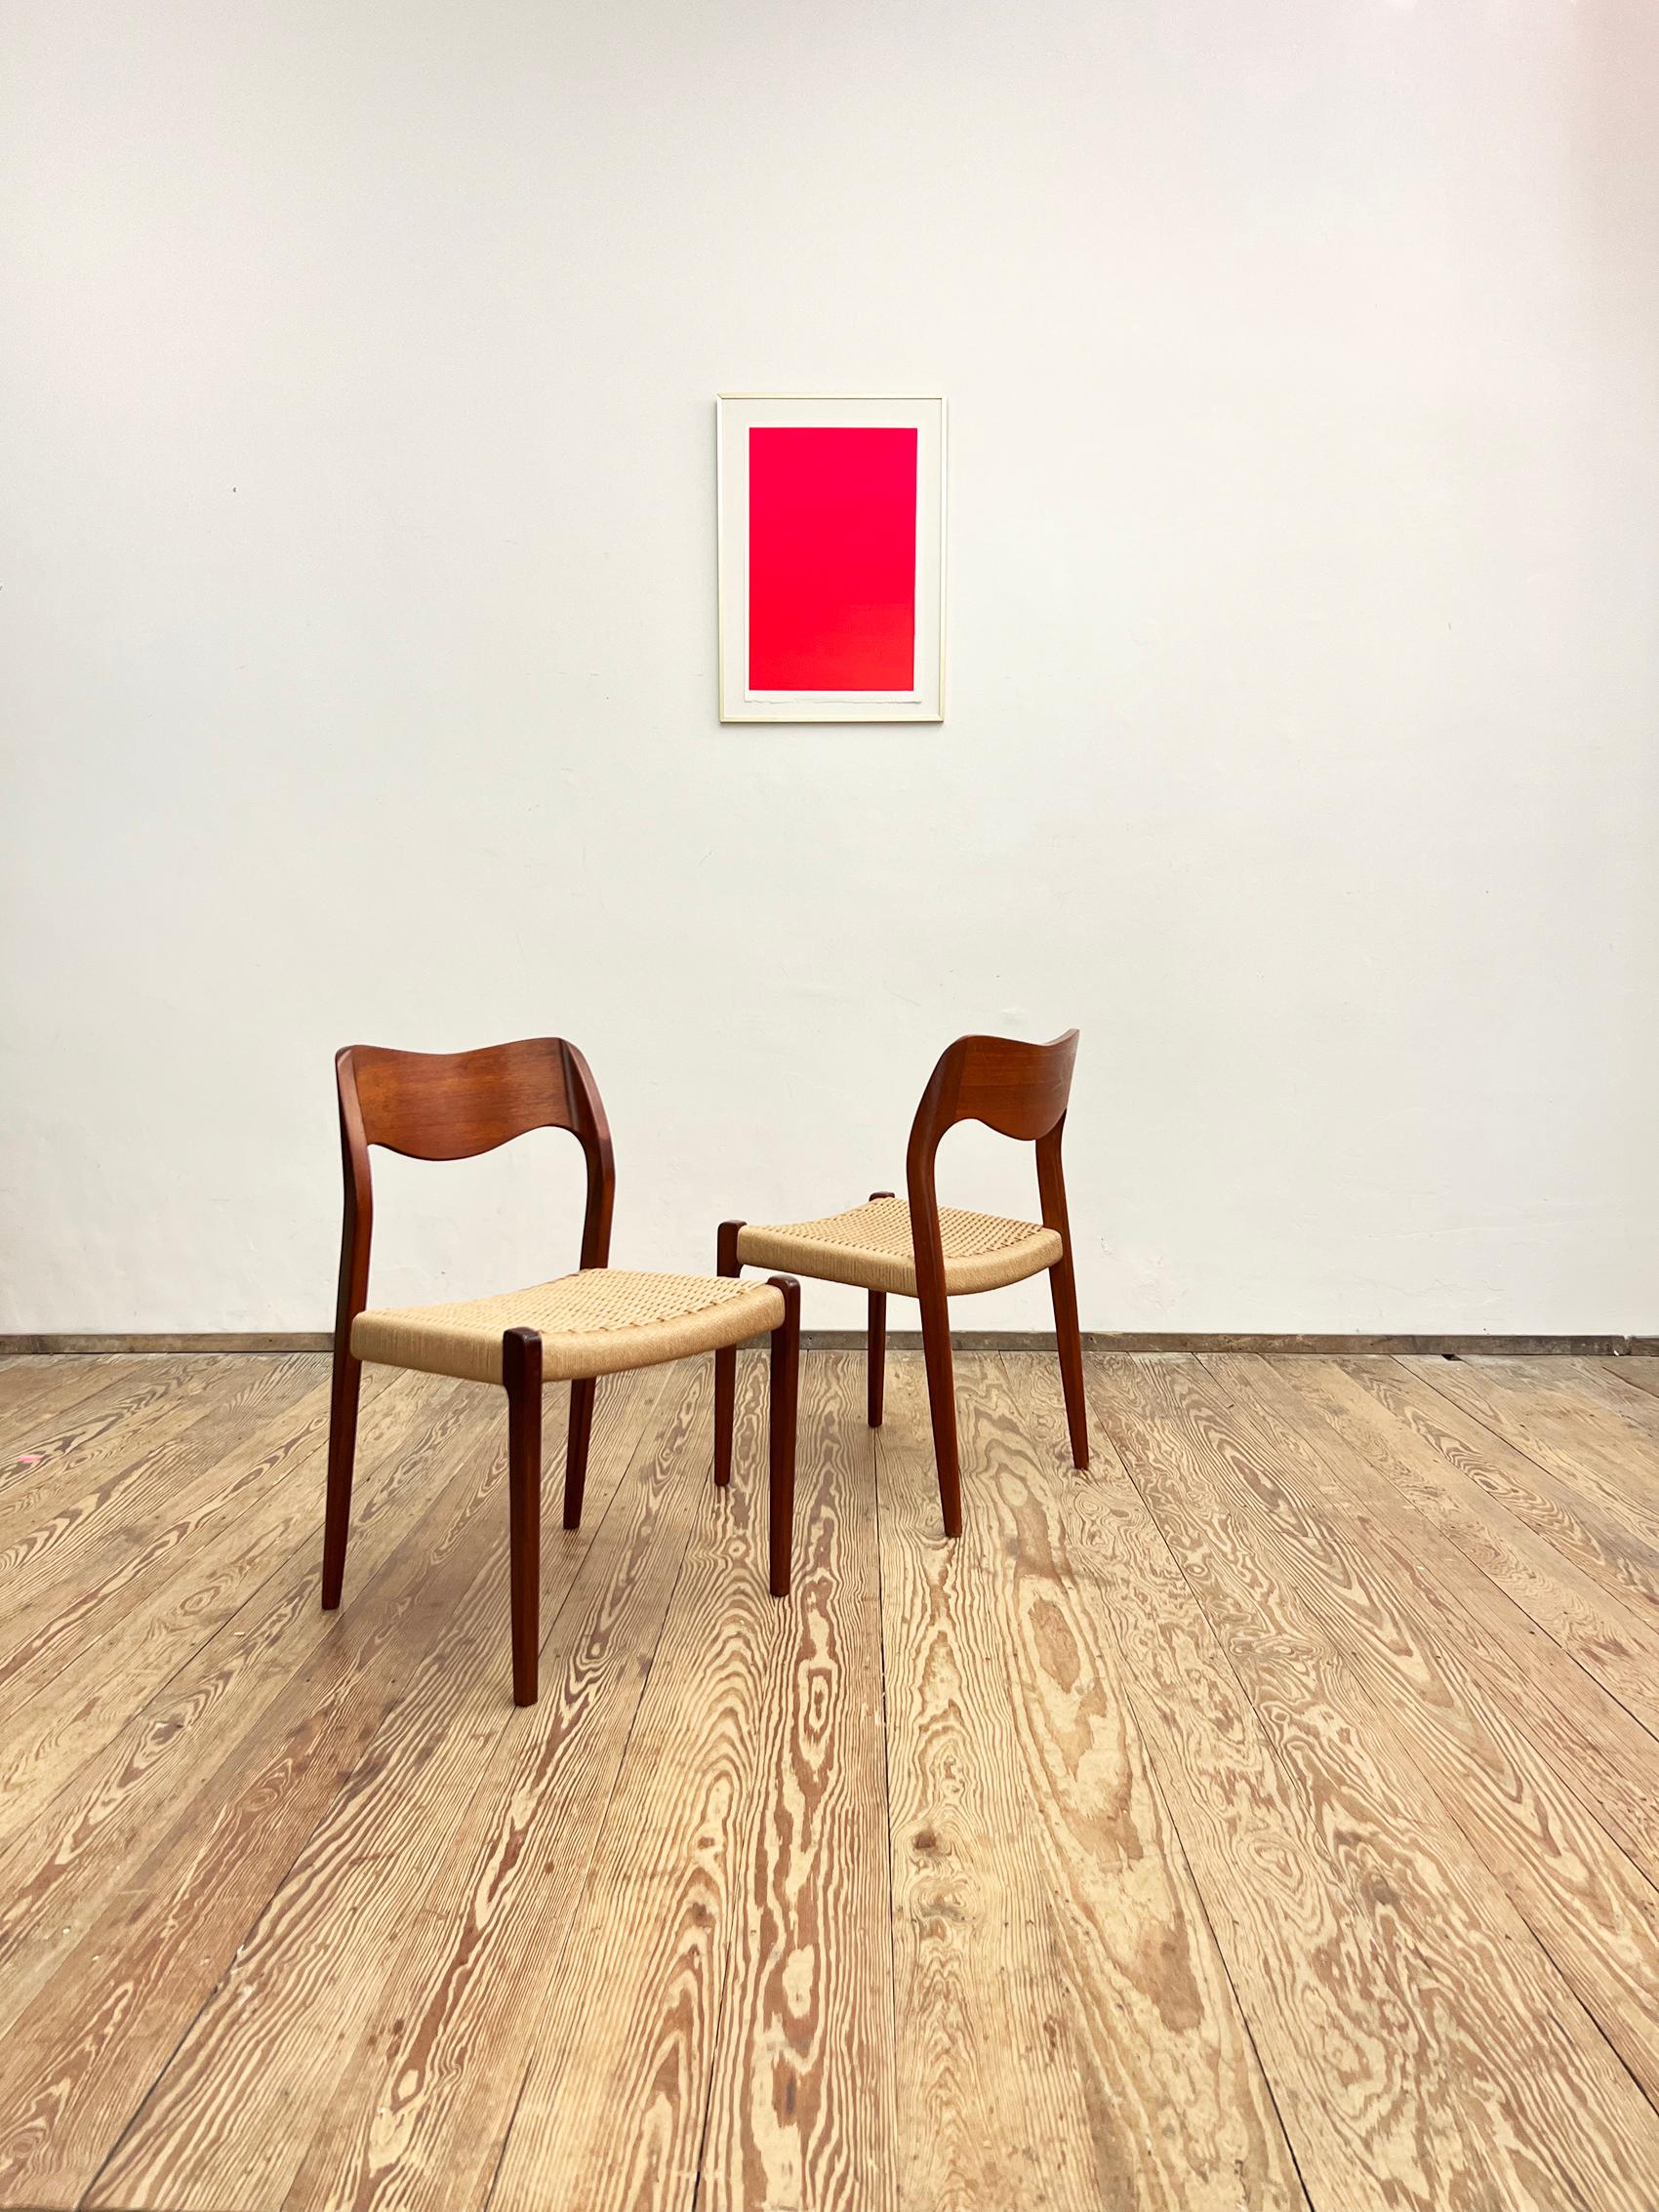 Dimensions 49 x 49 x 79 x 44cm (Width x Depth x Height x Seat height)

This beautiful set of vintage dining chairs designed by Niels O. Møller was manufactured by J. l. Møller in Denmark. The set features 4 chairs of teak wood, partially teak veneer